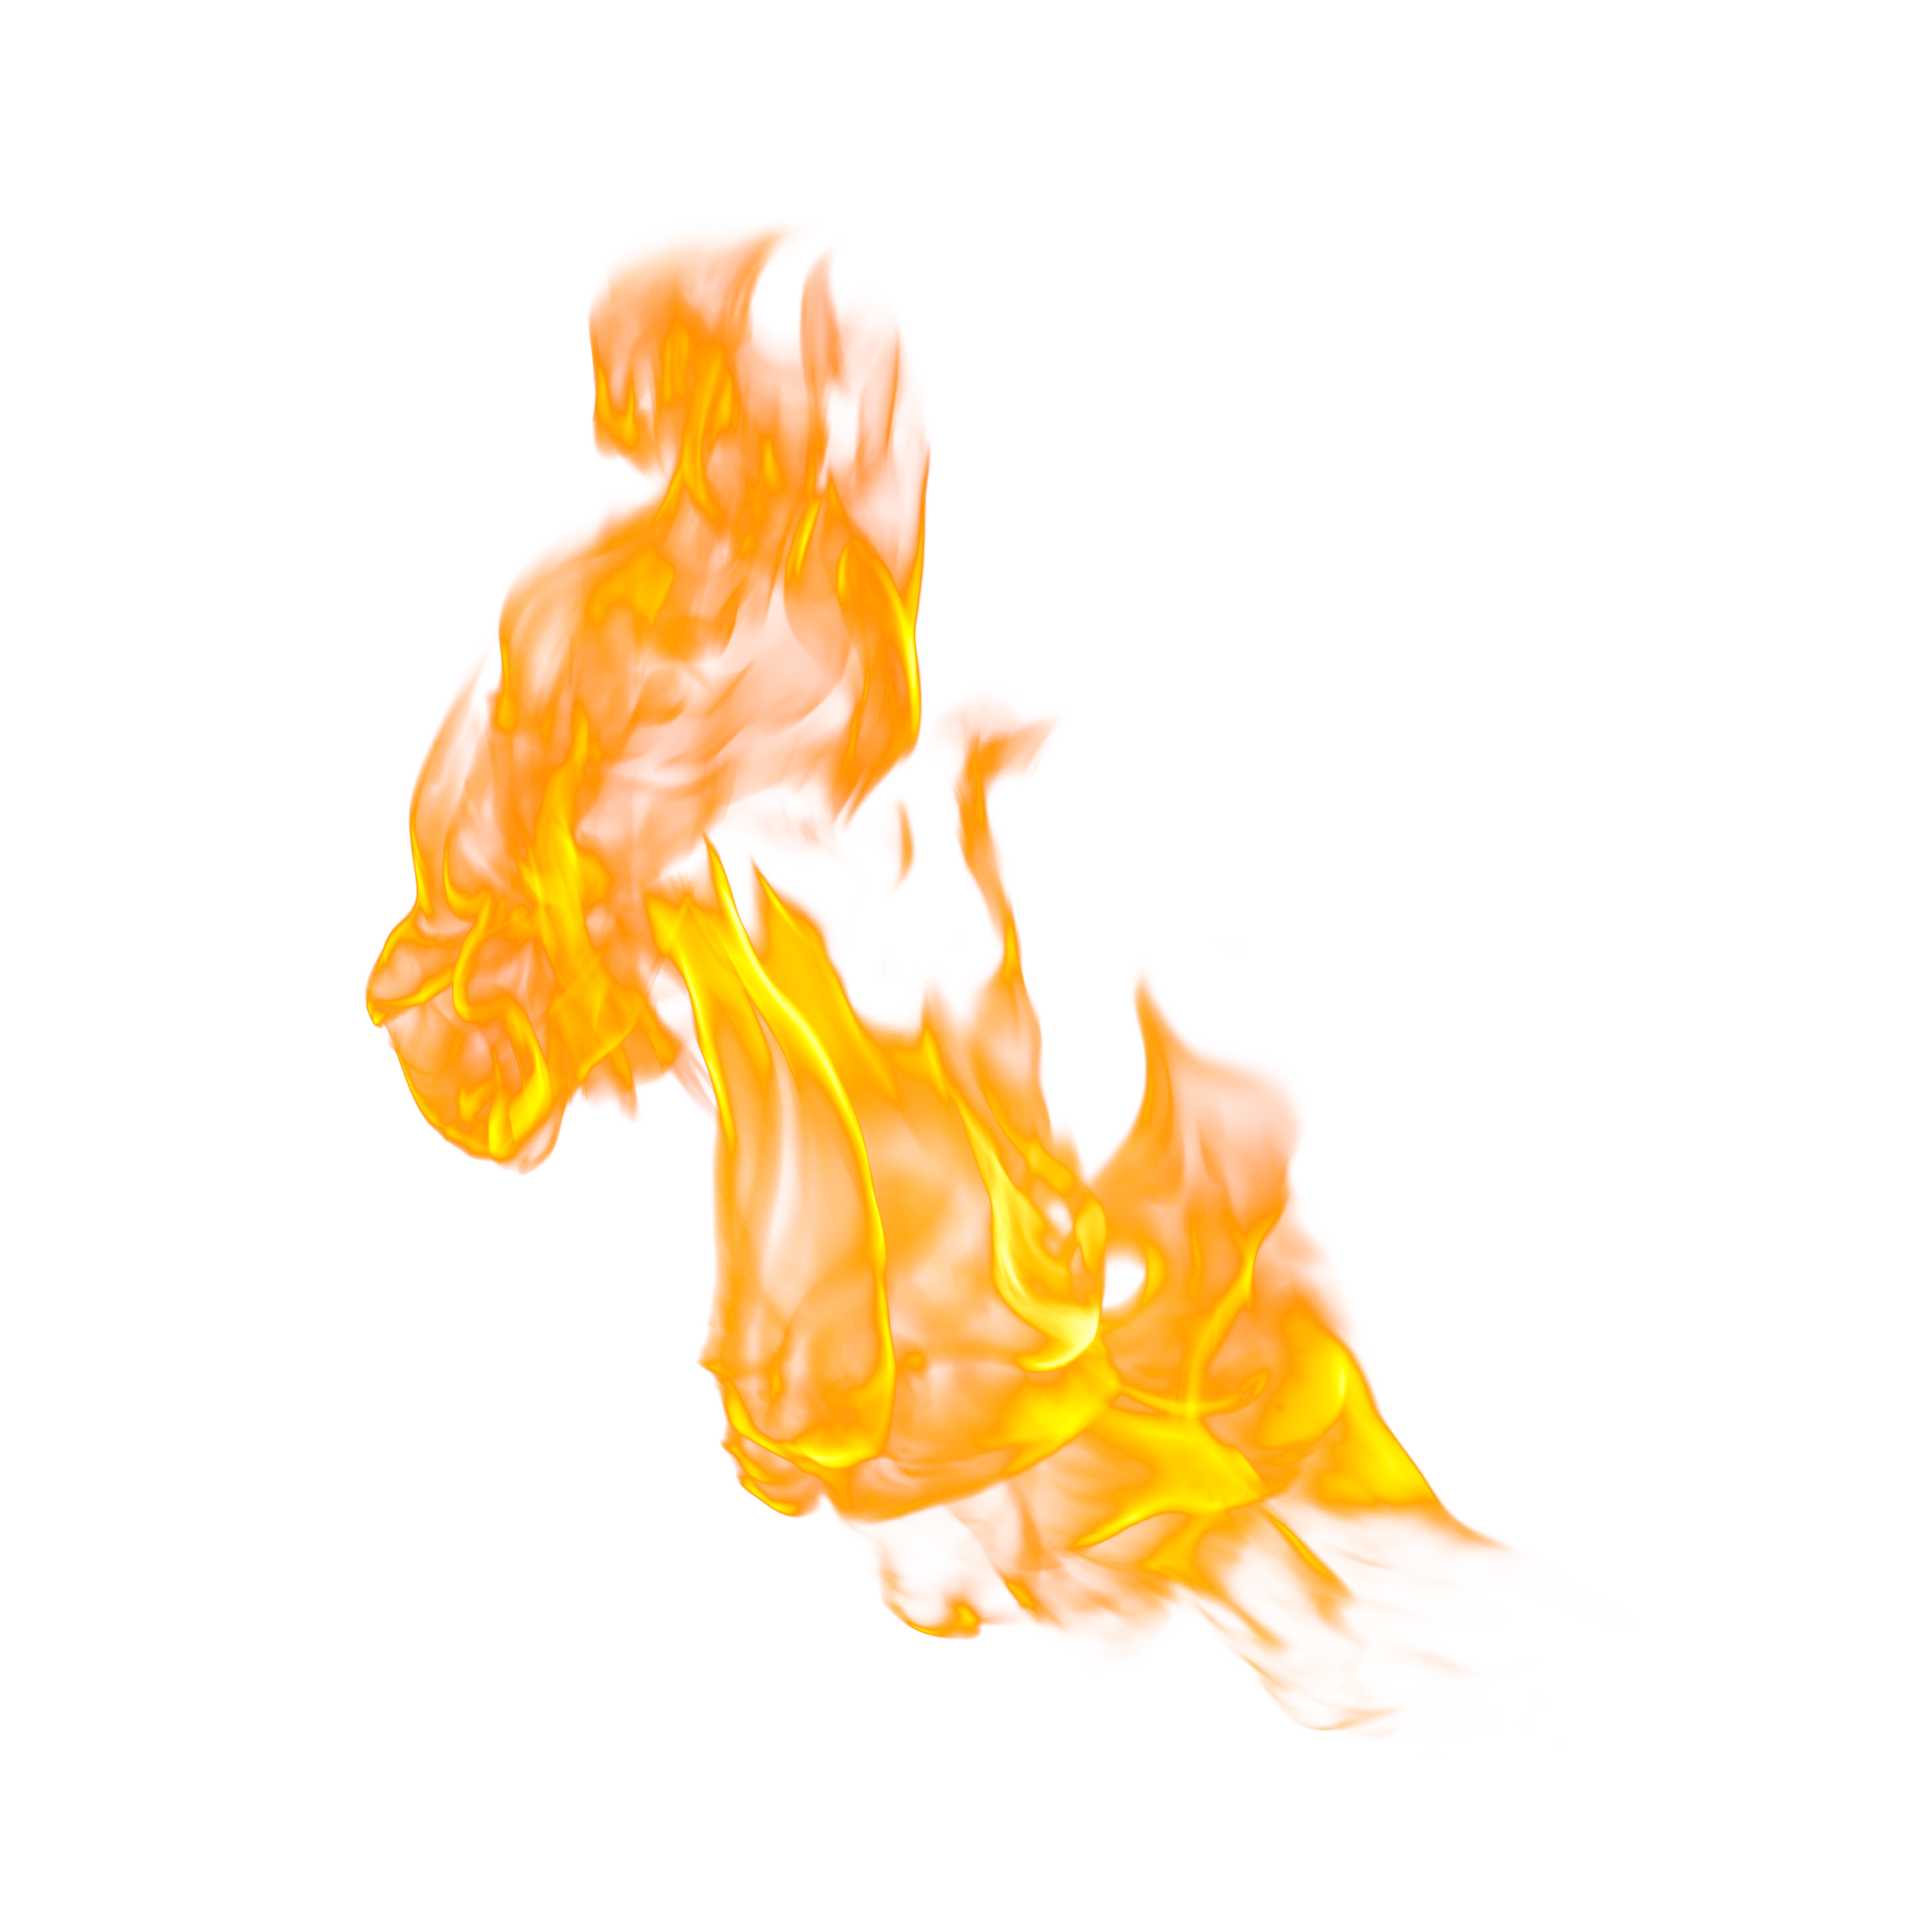 Flame Fire Combustion Yellow - Yellow background vibrant flame,Cool